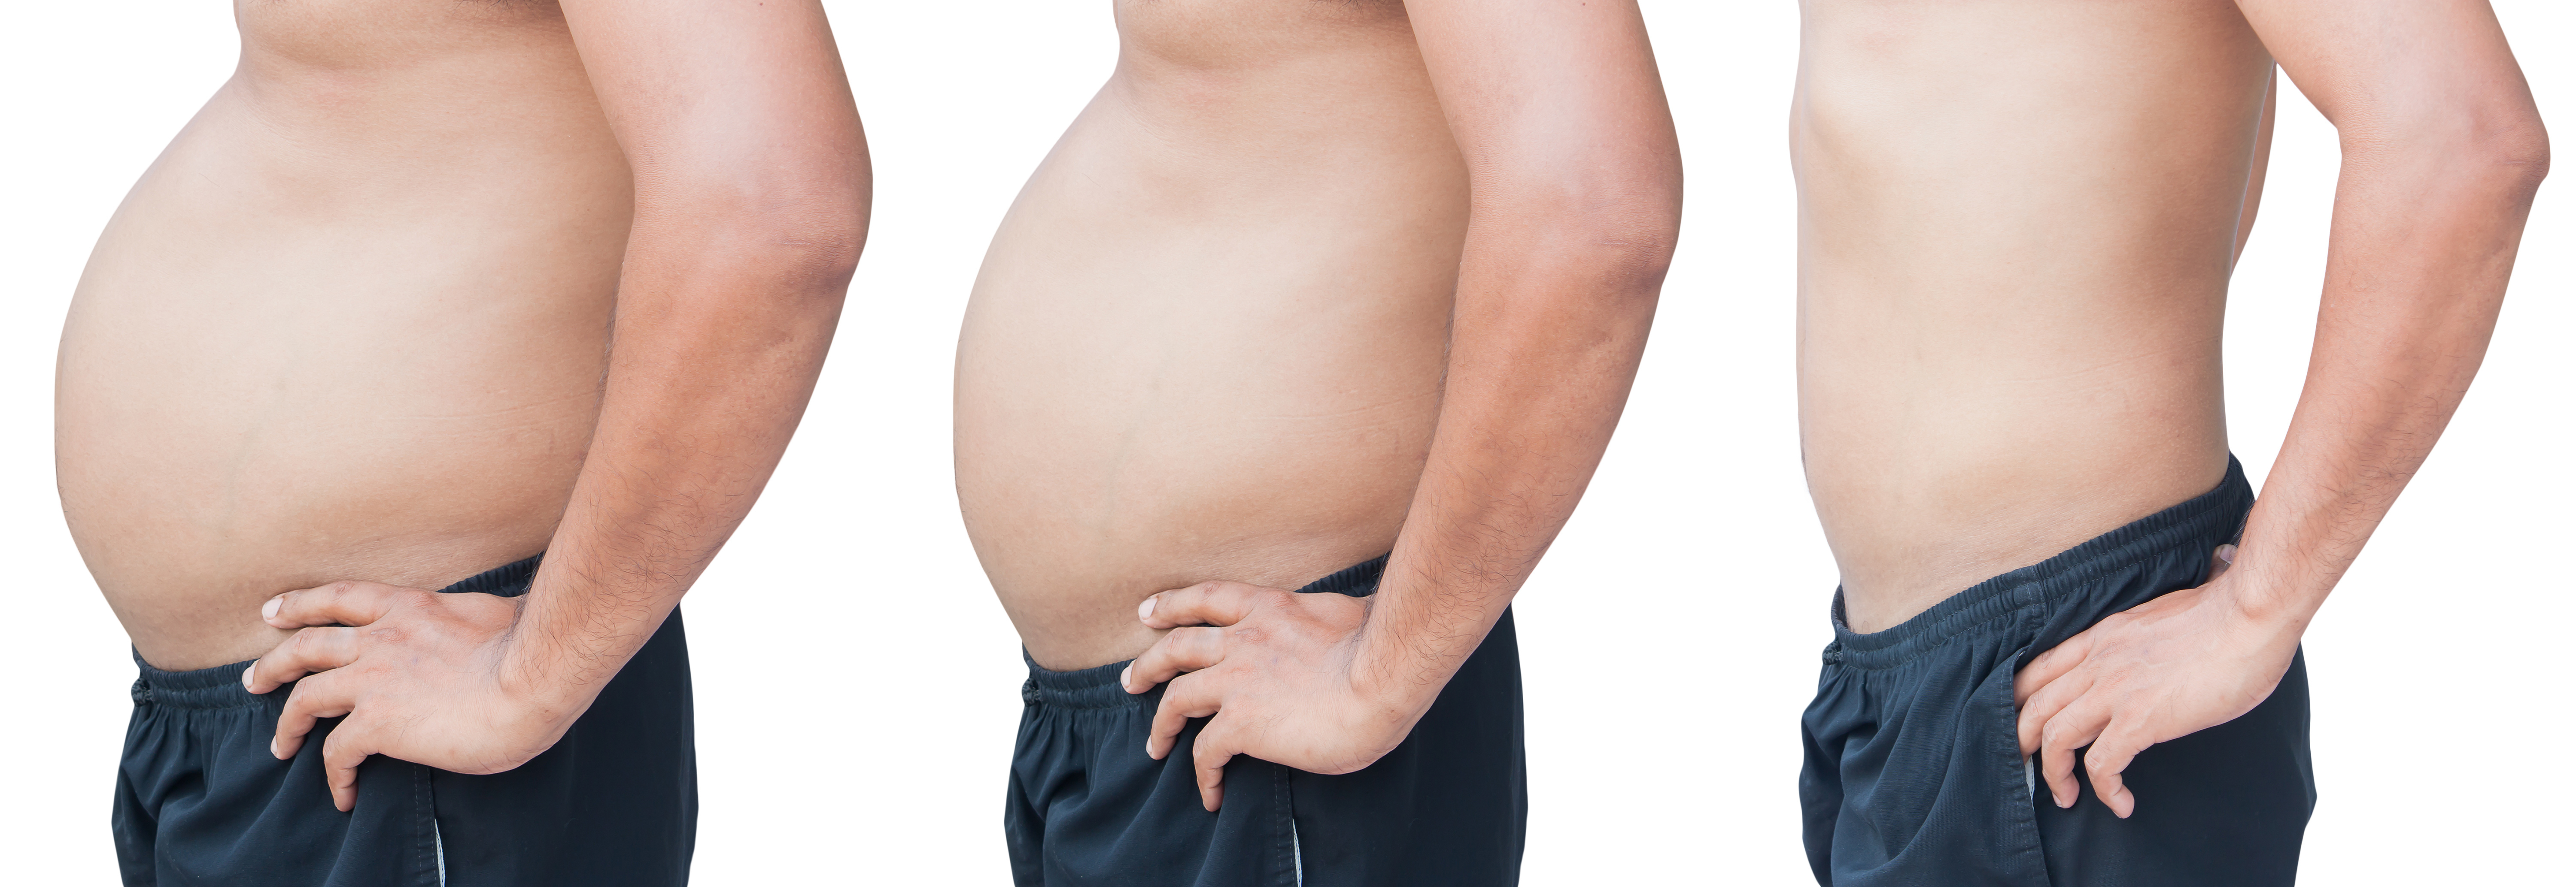 reducing belly fat and prostate risk